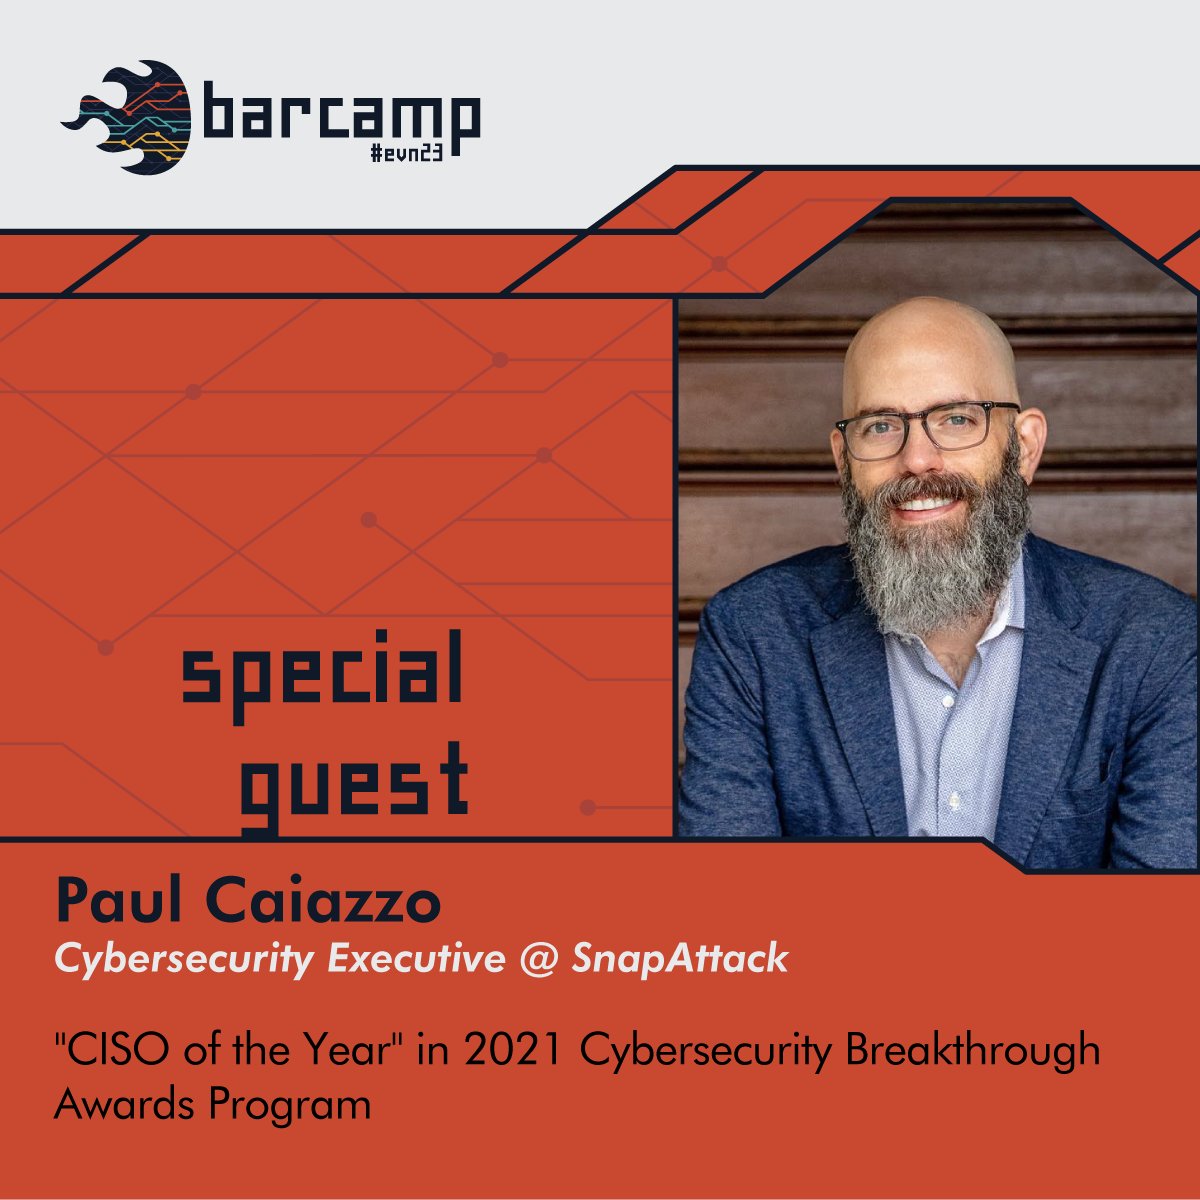 🌟 Revolutionize your cybersecurity prowess! Join us at #BarCampEVN23 and seize the opportunity to be in the presence of Paul Caiazzo, the Cybersecurity Executive at SnapAttack.
💥 REGISTER NOW! eventbrite.co.uk/e/barcamp-yere…